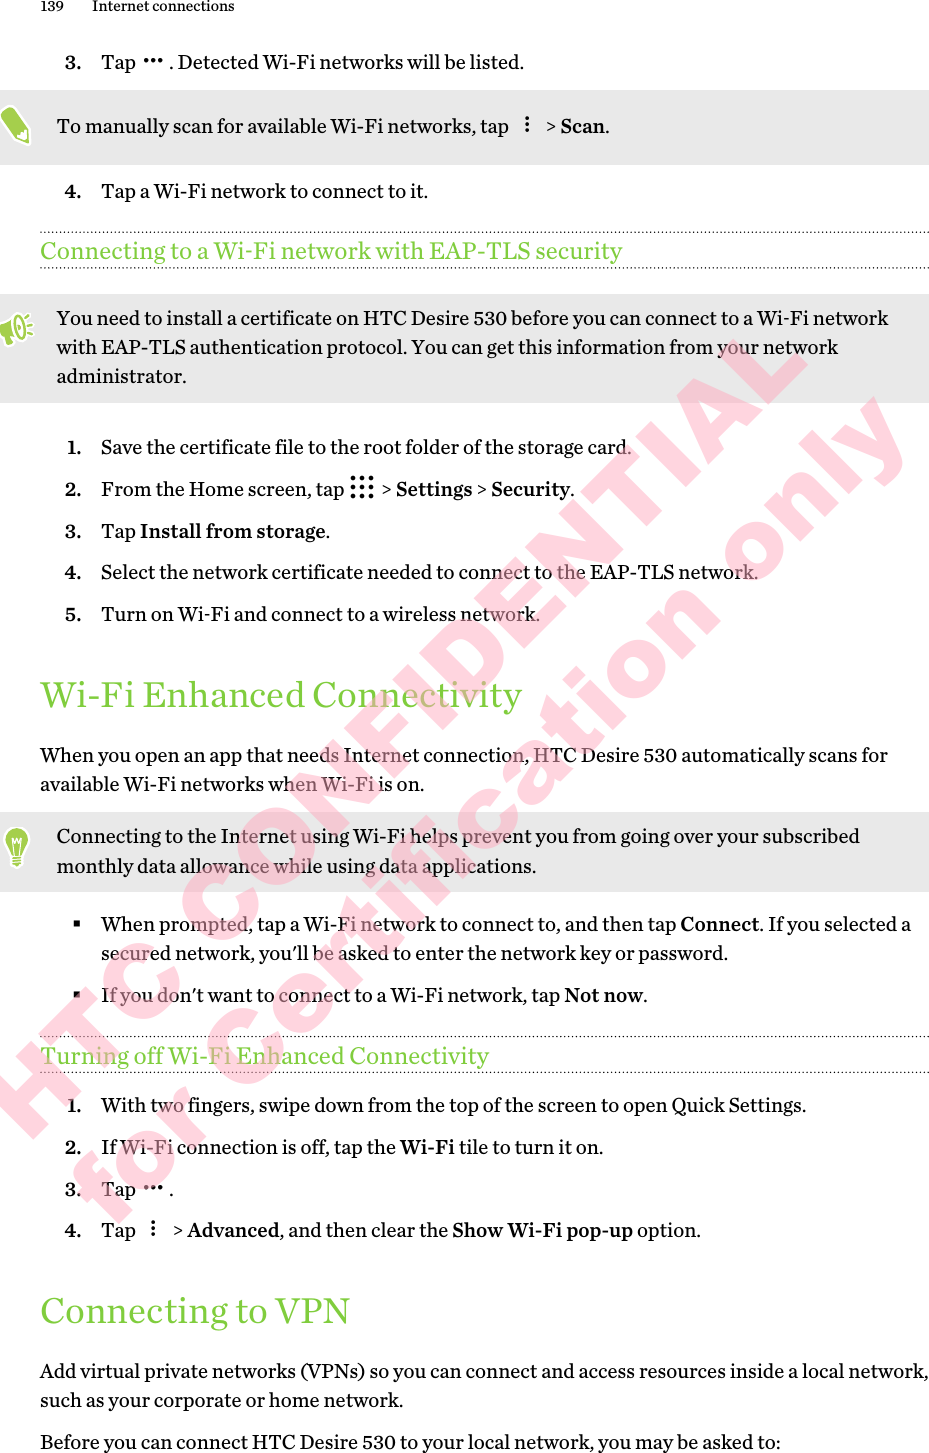 3. Tap  . Detected Wi-Fi networks will be listed.To manually scan for available Wi-Fi networks, tap   &gt; Scan.4. Tap a Wi-Fi network to connect to it.Connecting to a Wi‑Fi network with EAP-TLS securityYou need to install a certificate on HTC Desire 530 before you can connect to a Wi‑Fi network with EAP-TLS authentication protocol. You can get this information from your network administrator.1. Save the certificate file to the root folder of the storage card.2. From the Home screen, tap   &gt; Settings &gt; Security.3. Tap Install from storage.4. Select the network certificate needed to connect to the EAP-TLS network.5. Turn on Wi‑Fi and connect to a wireless network.Wi-Fi Enhanced ConnectivityWhen you open an app that needs Internet connection, HTC Desire 530 automatically scans for available Wi-Fi networks when Wi-Fi is on.Connecting to the Internet using Wi-Fi helps prevent you from going over your subscribed monthly data allowance while using data applications.§When prompted, tap a Wi-Fi network to connect to, and then tap Connect. If you selected a secured network, you&apos;ll be asked to enter the network key or password. §If you don&apos;t want to connect to a Wi-Fi network, tap Not now.Turning off Wi-Fi Enhanced Connectivity1. With two fingers, swipe down from the top of the screen to open Quick Settings.2. If Wi-Fi connection is off, tap the Wi-Fi tile to turn it on.3. Tap  .4. Tap   &gt; Advanced, and then clear the Show Wi-Fi pop-up option.Connecting to VPNAdd virtual private networks (VPNs) so you can connect and access resources inside a local network, such as your corporate or home network.Before you can connect HTC Desire 530 to your local network, you may be asked to:139 Internet connectionsHTC CONFIDENTIAL for Certification only